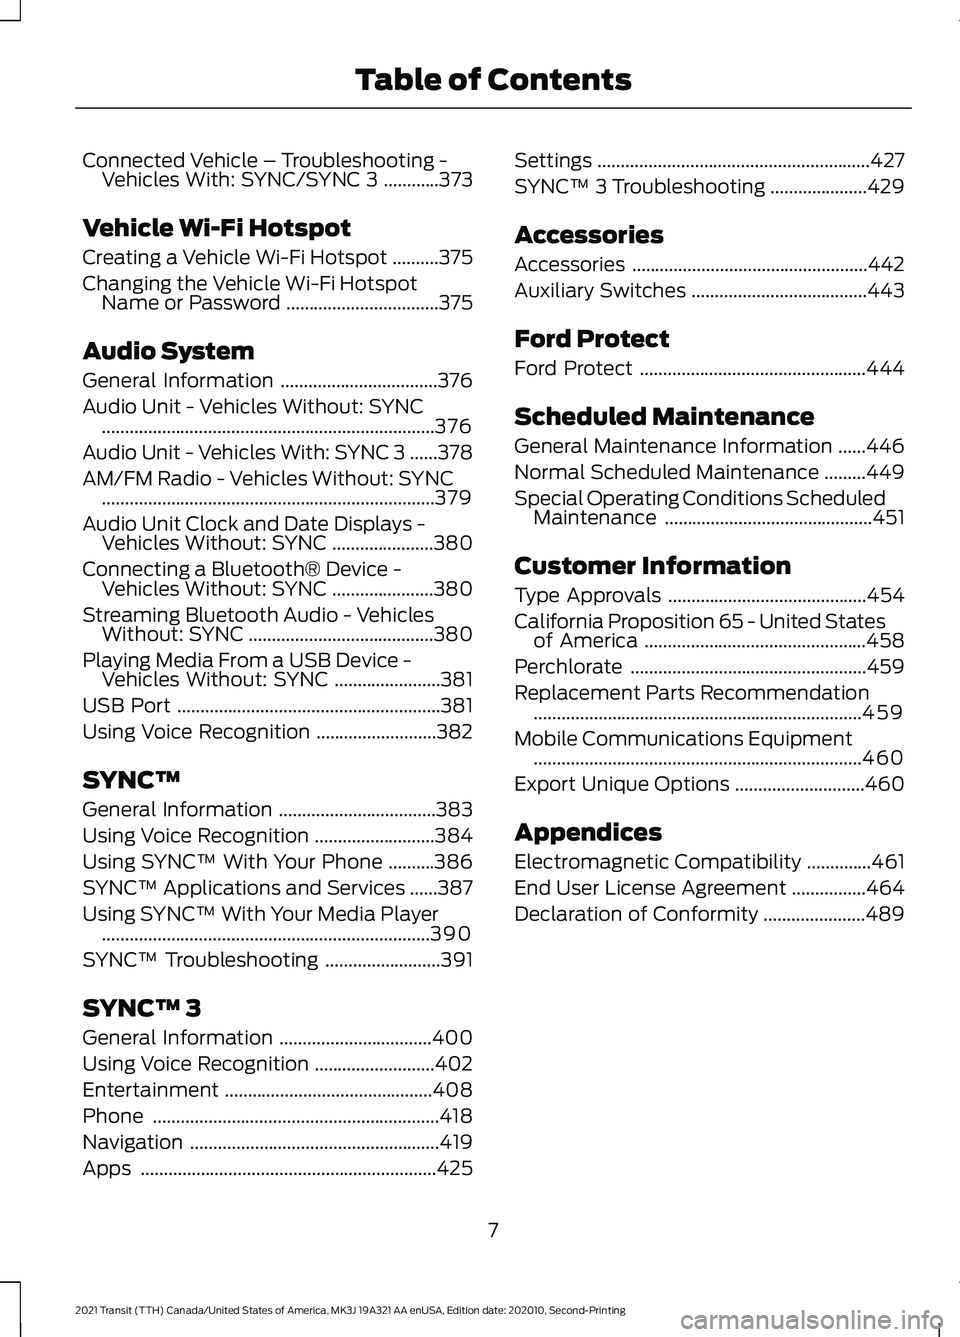 FORD TRANSIT 2021  Owners Manual Connected Vehicle – Troubleshooting -
Vehicles With: SYNC/SYNC 3 ............373
Vehicle Wi-Fi Hotspot
Creating a Vehicle Wi-Fi Hotspot ..........
375
Changing the Vehicle Wi-Fi Hotspot Name or Pass